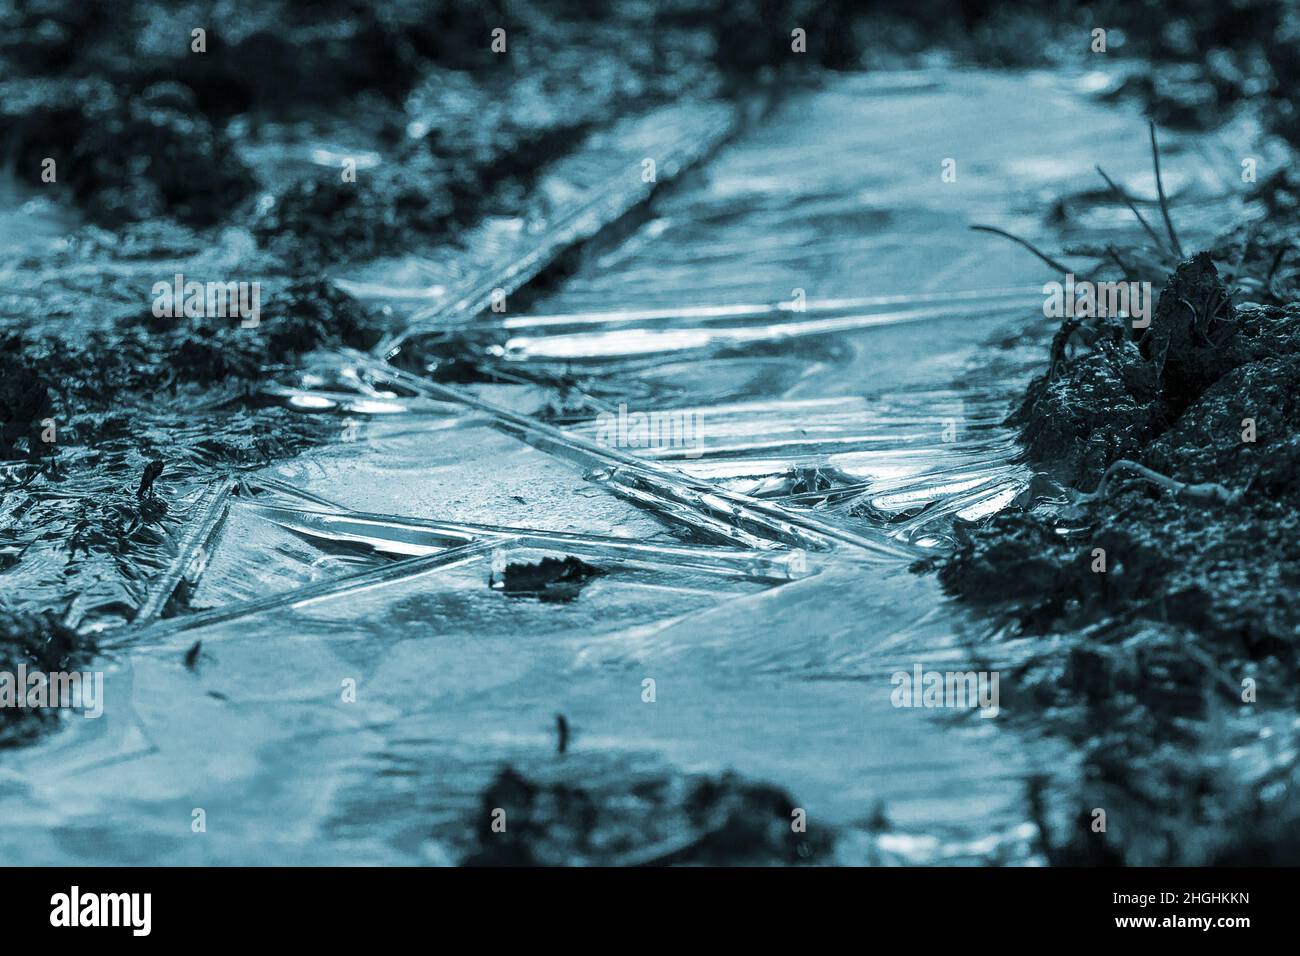 Ice on frozen mud path mono blue tint landscape format. Hard angled lines in ice smooth areas and part frozen soil. Textures background or ice image Stock Photo